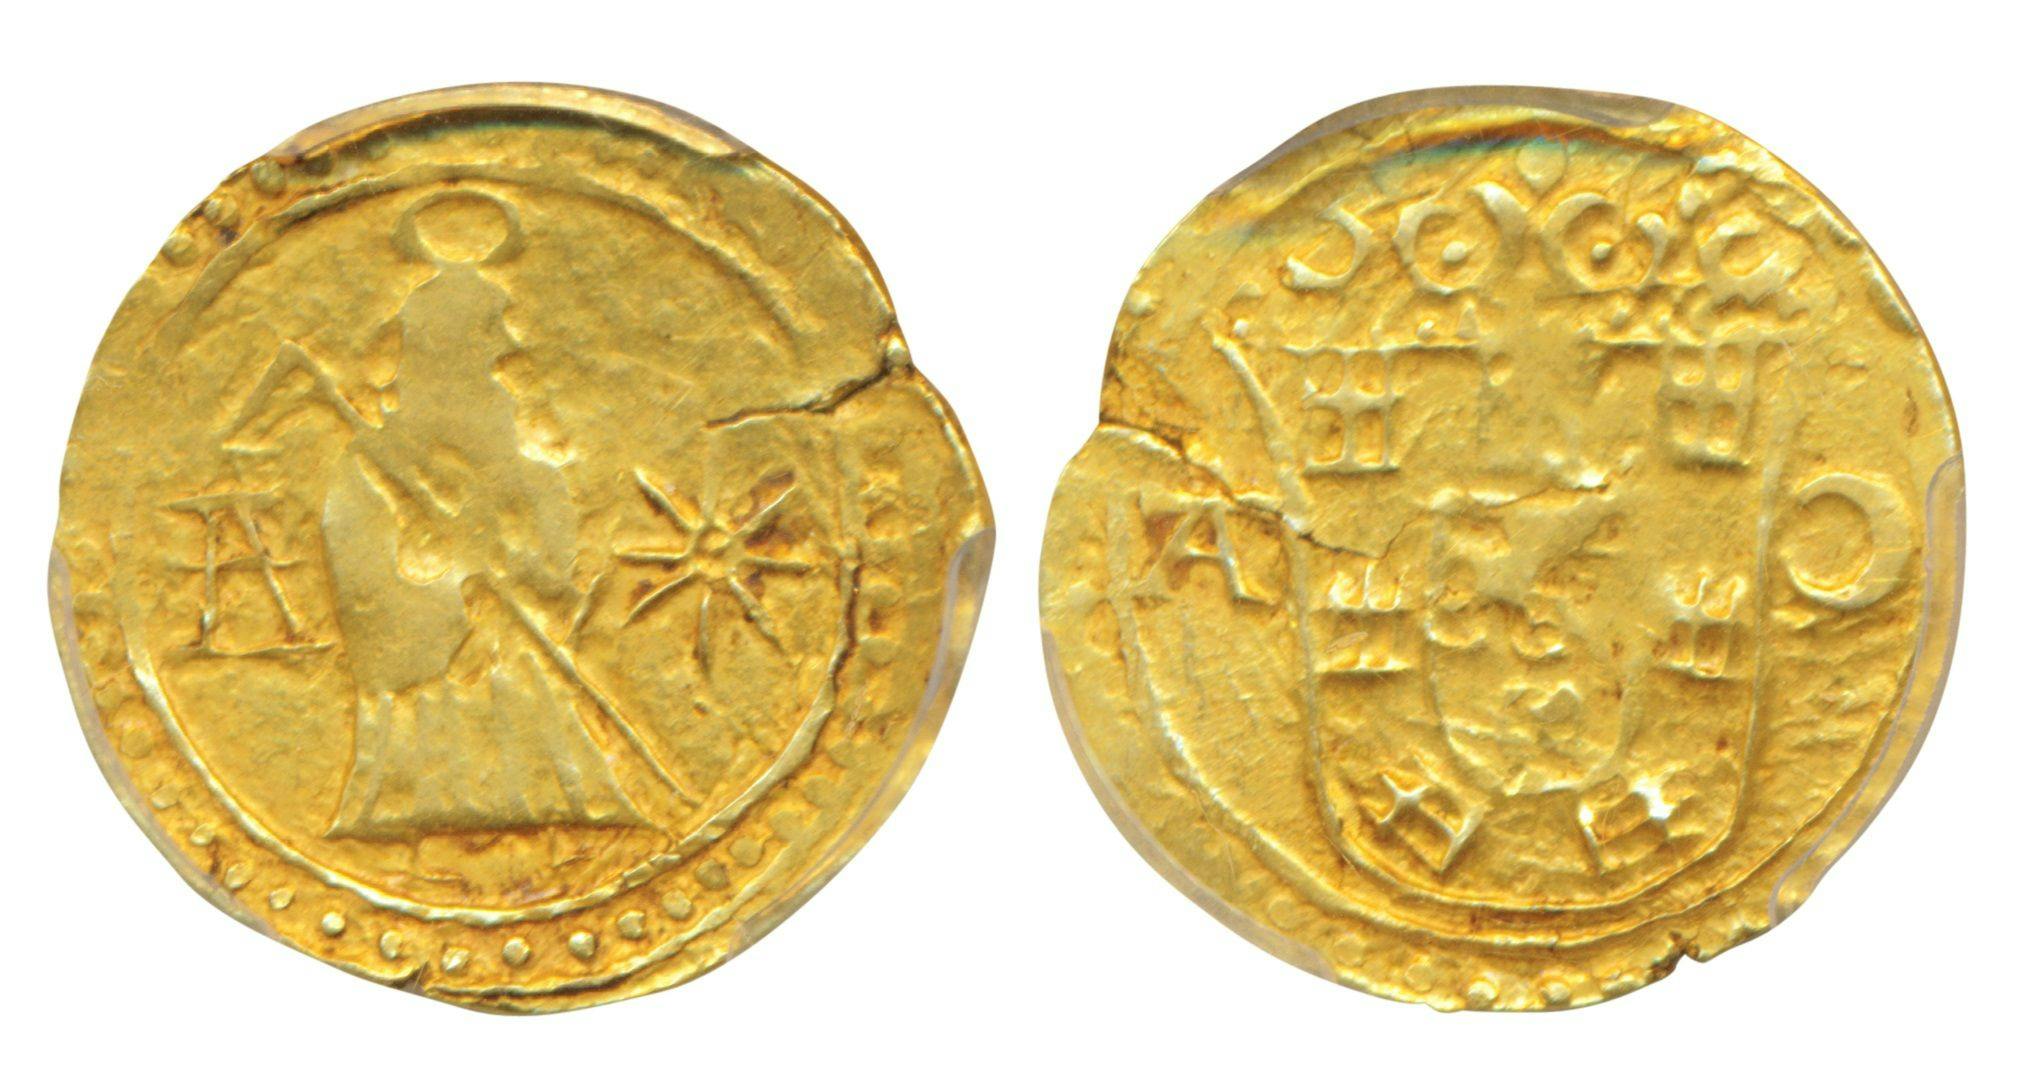 Gold coin of King John III from Cochin (15th Century CE)